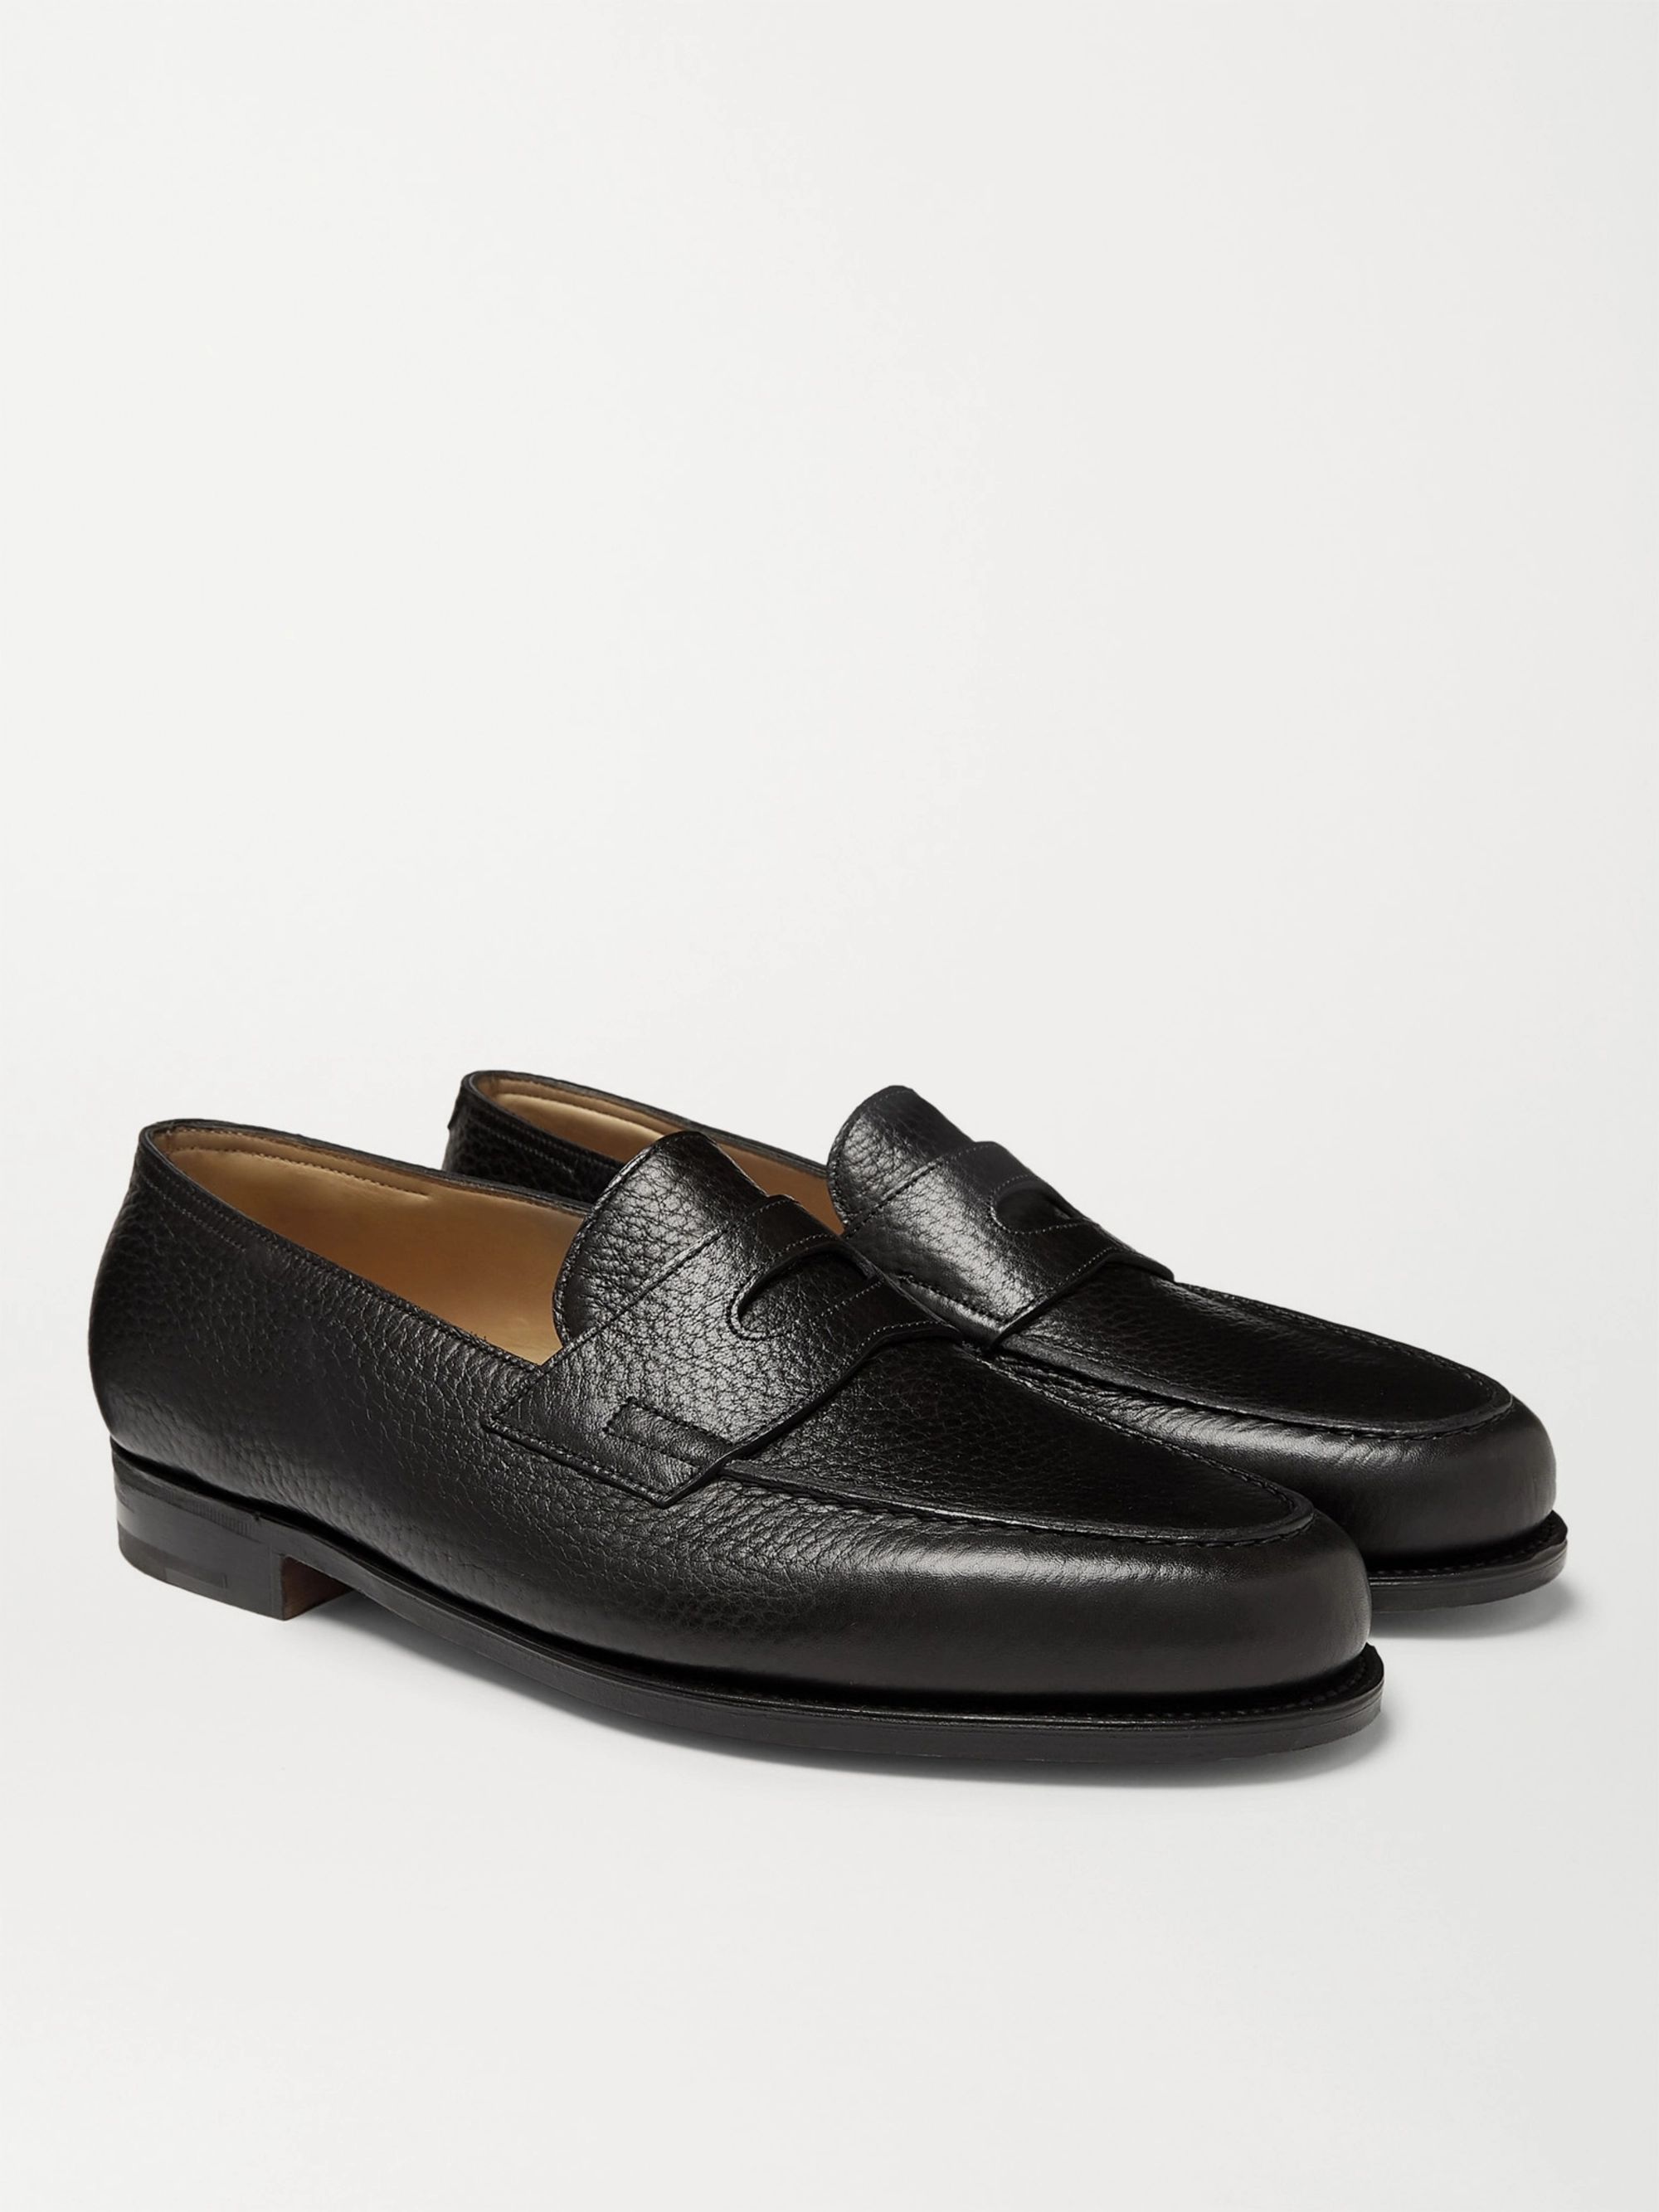 Lopez Full-Grain Leather Penny Loafers 